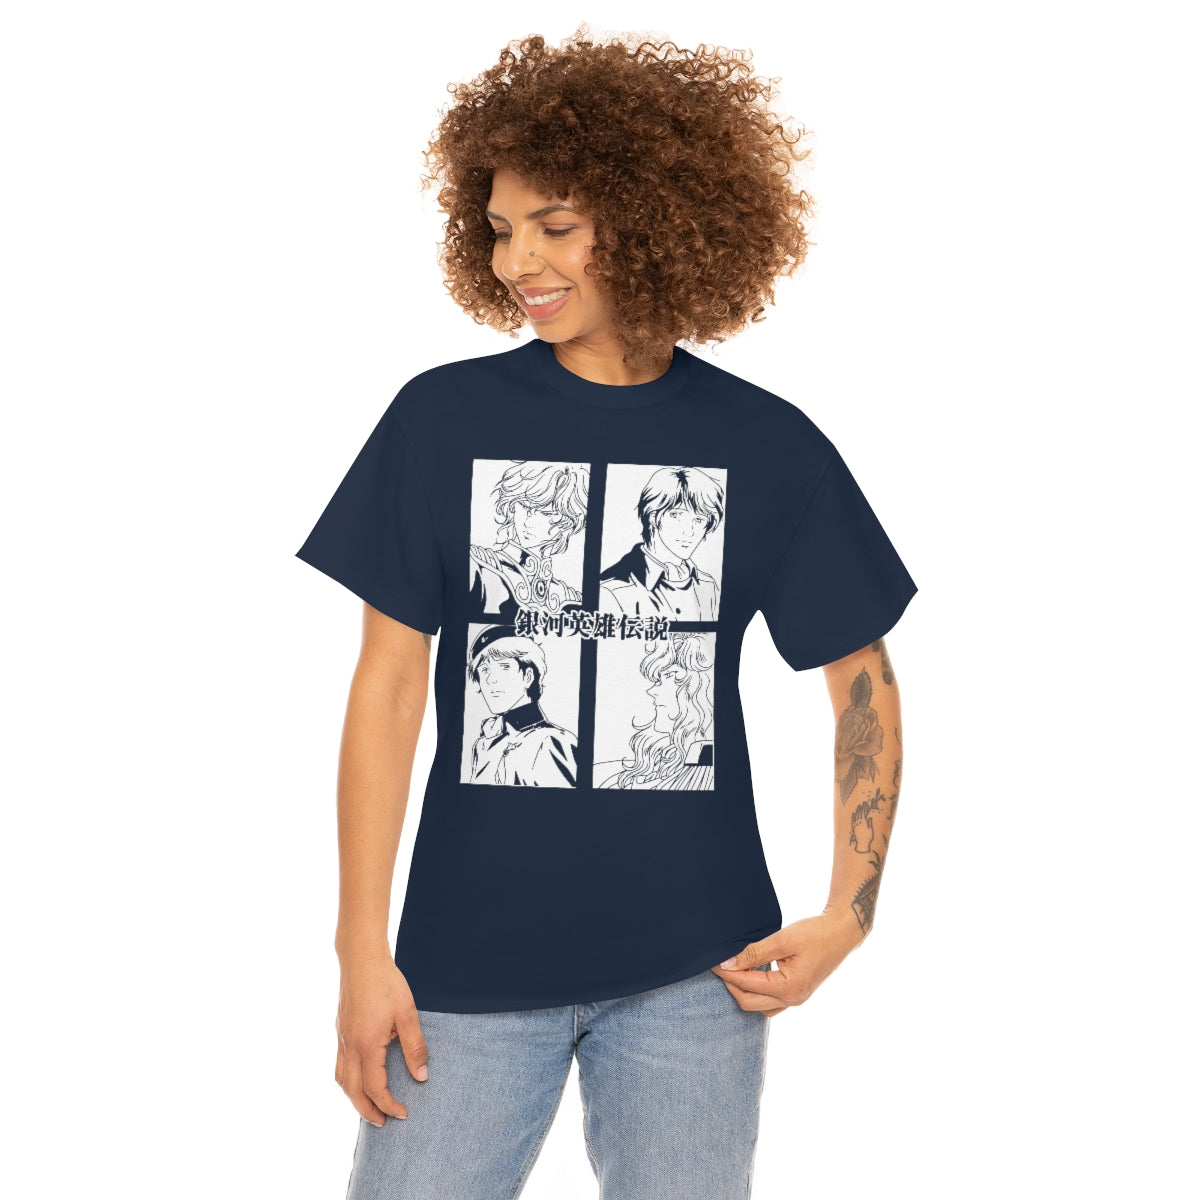 Legend of the Galactic Heroes T-Shirt